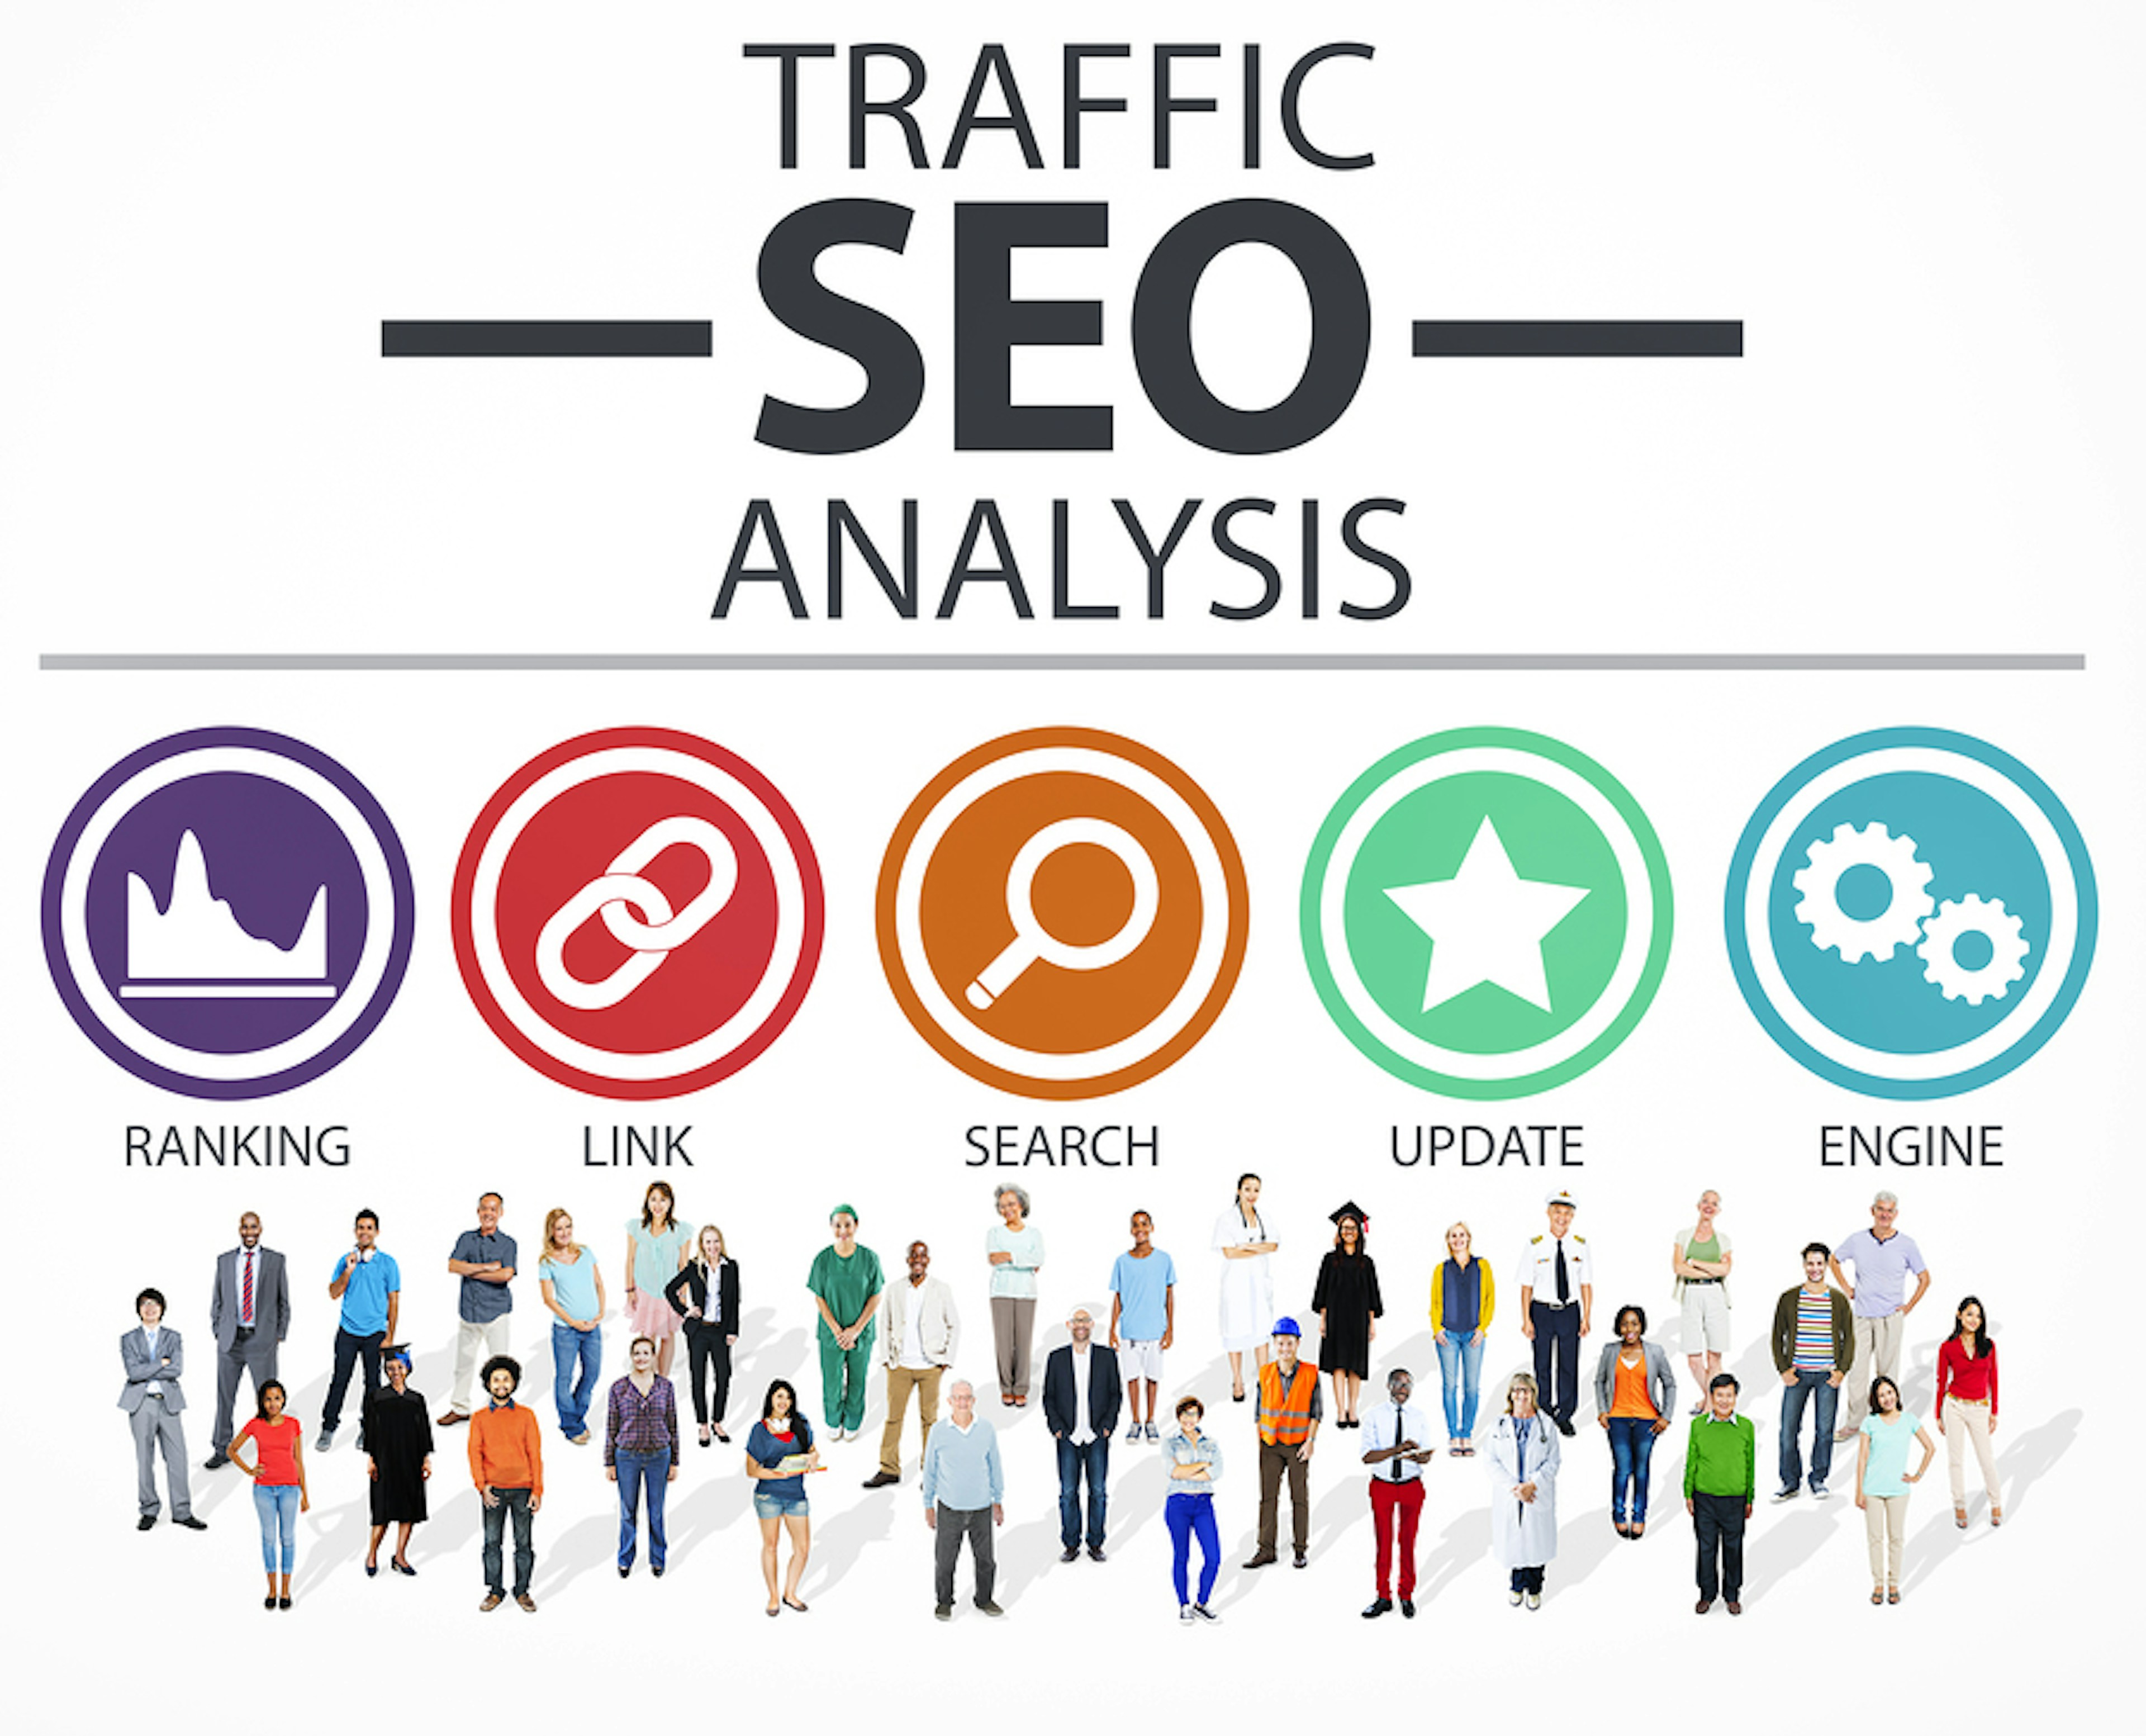 What You Need To Know About SEO in 2016 Before Optimizing